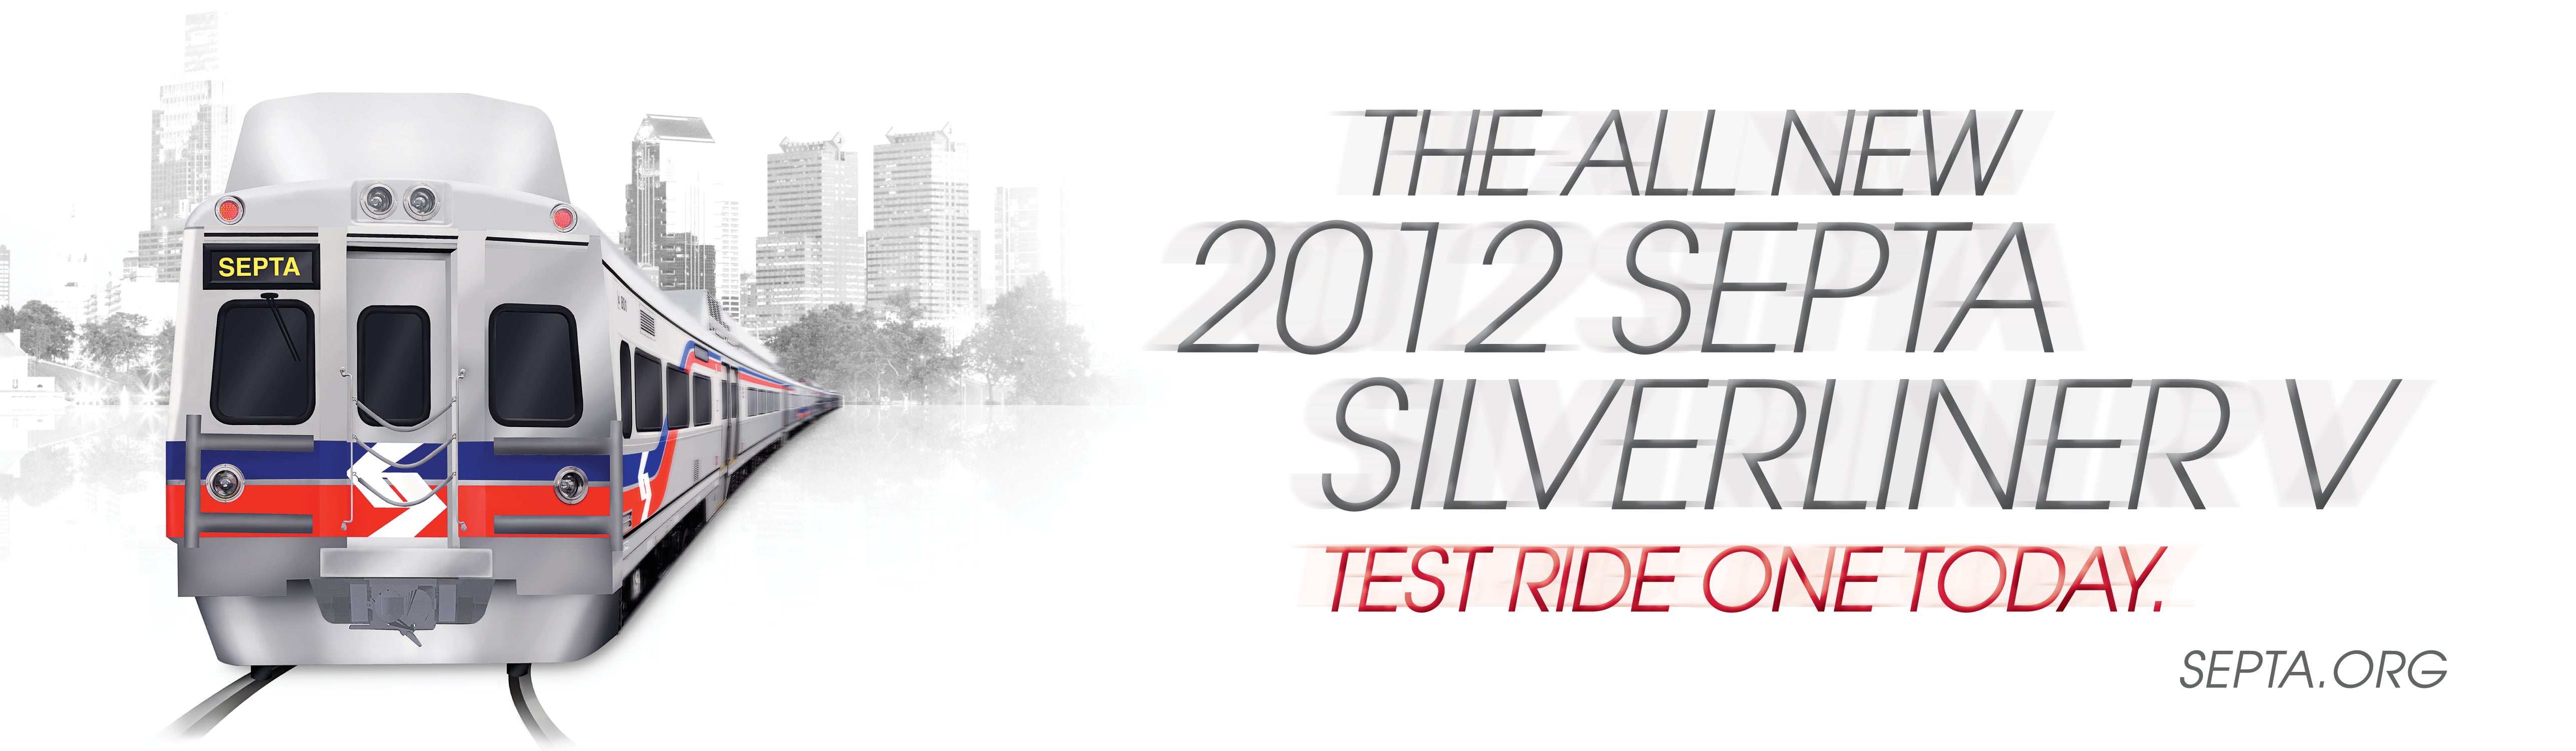 The centerpiece of a new ad campaign touting the Silverliner V railcars.